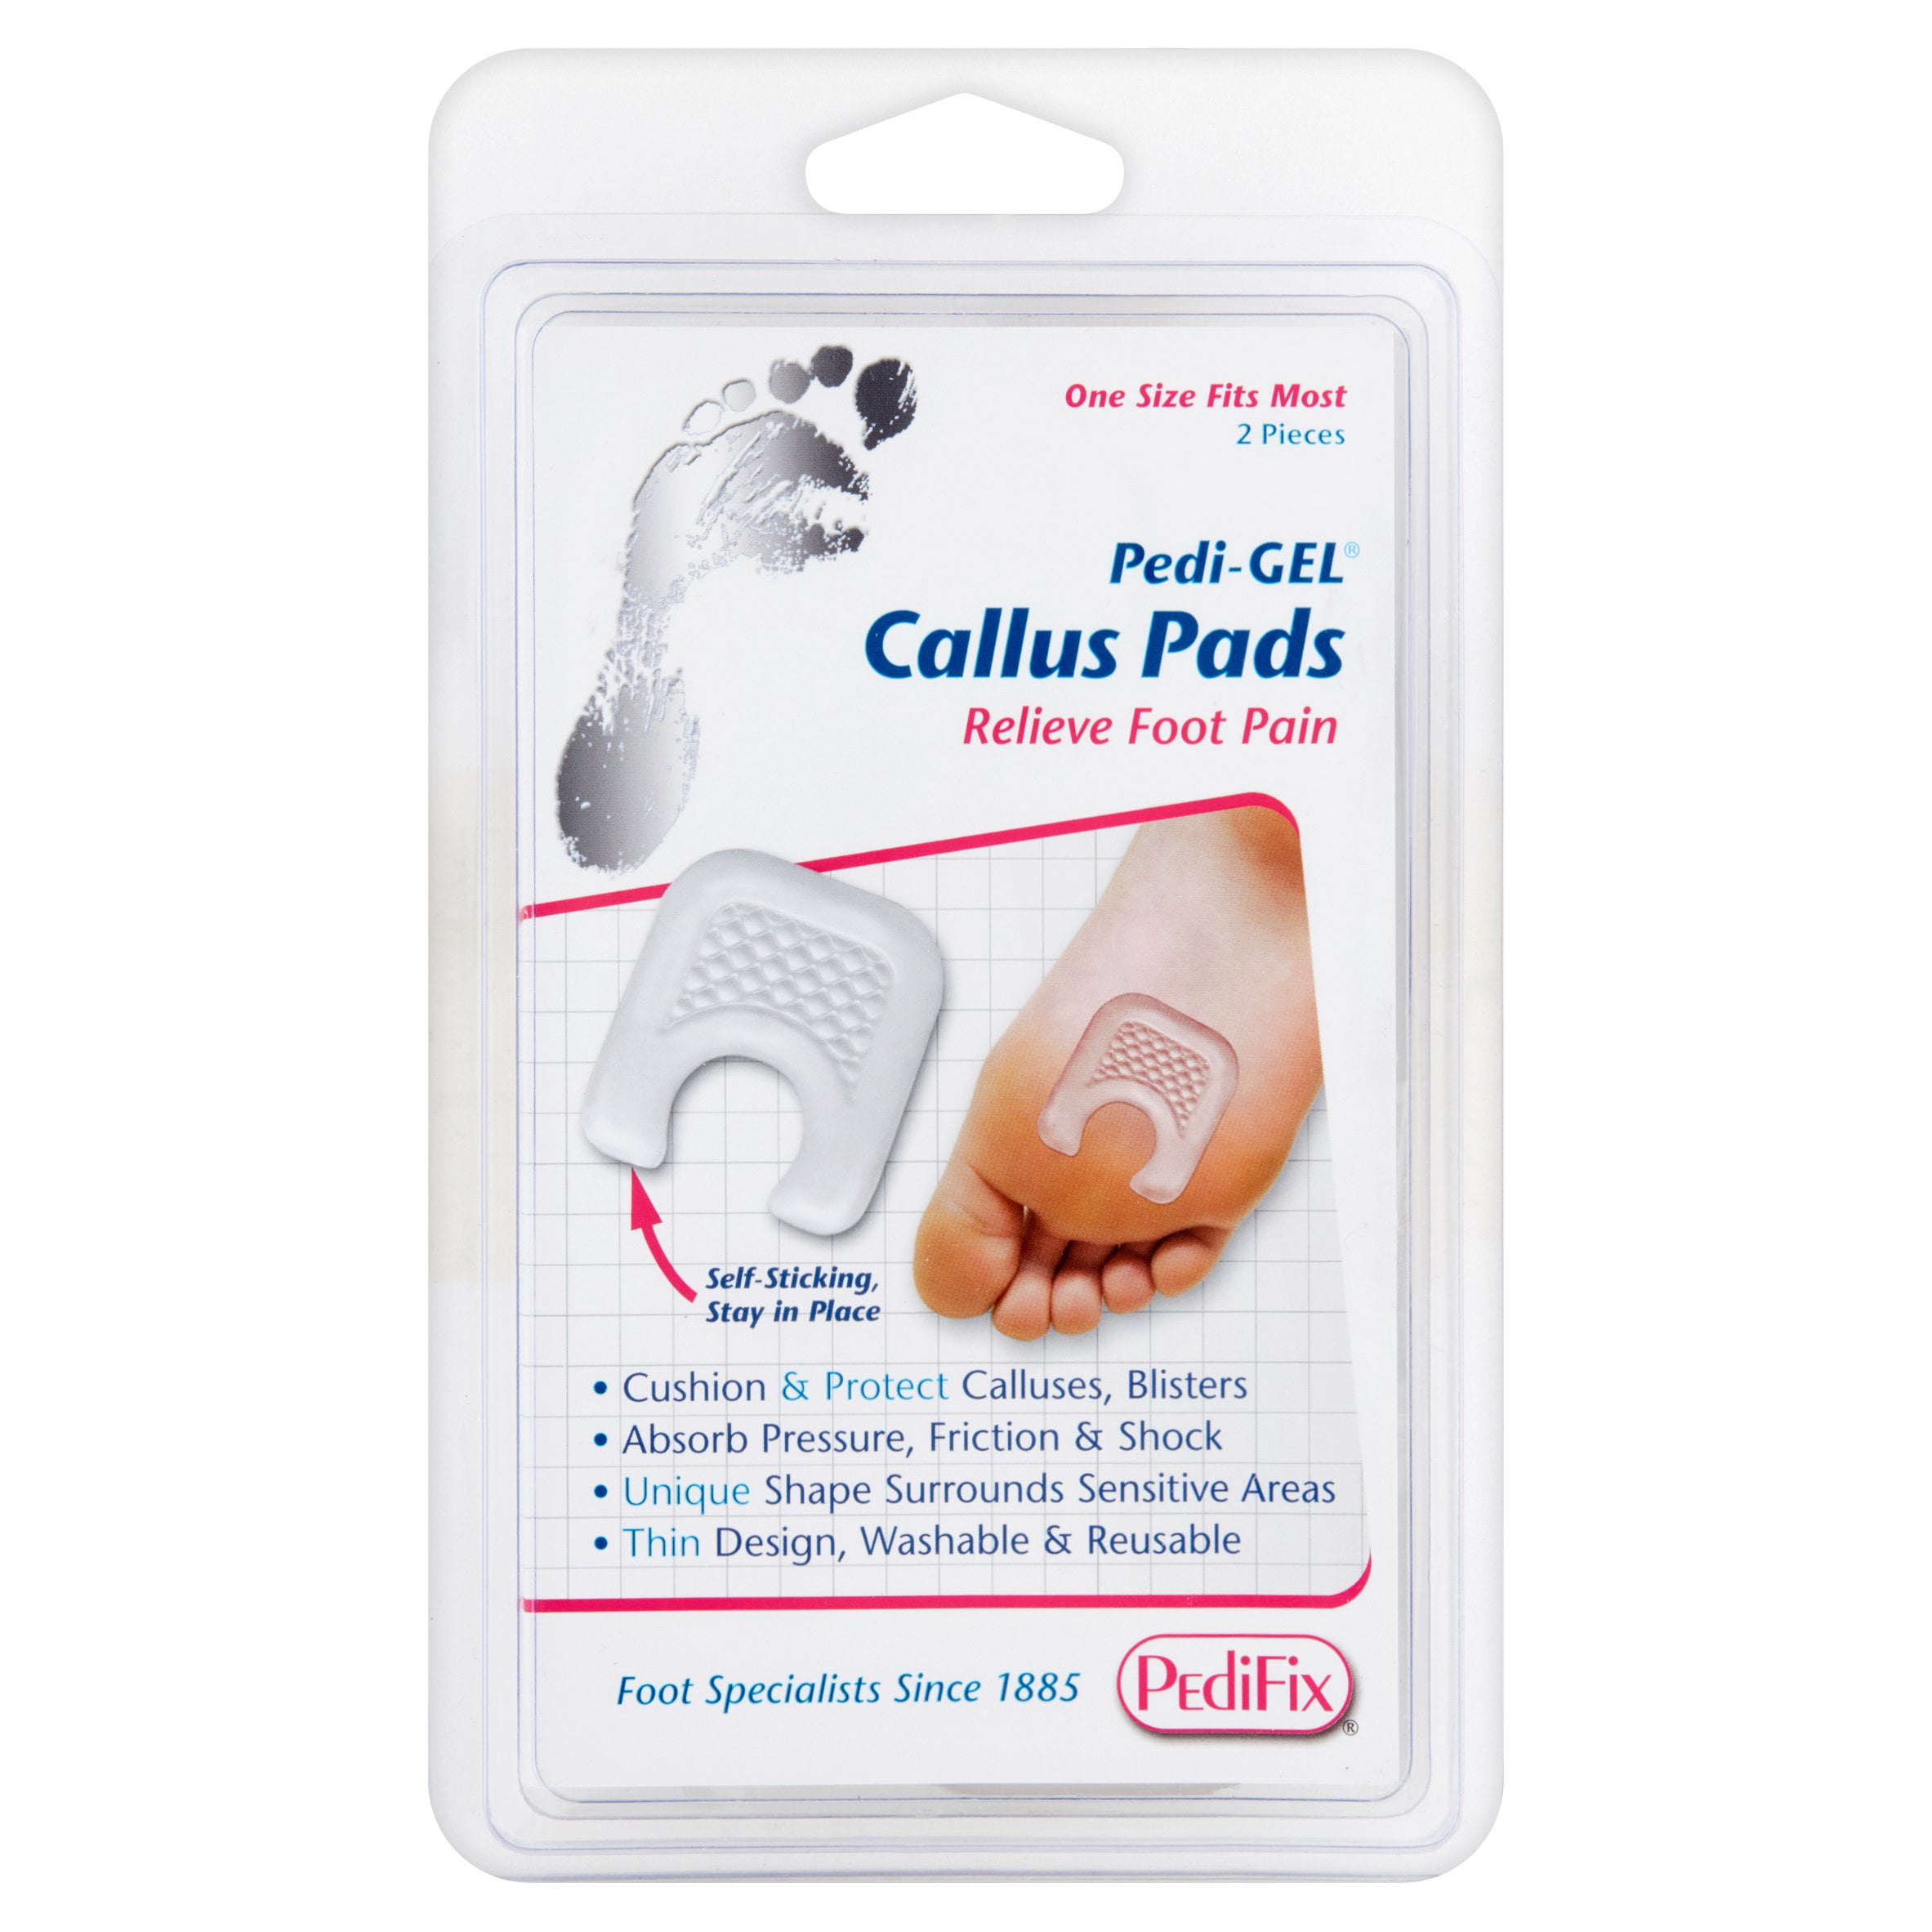  Ped Egg Classic Callus Remover, As Seen On TV, New Look, Safely  and Painlessly Remove Tough Calluses & Dry Skin to Reveal Smooth Soft Feet,  135 Precision Micro-Blades, Traps Shavings Mess-Free 